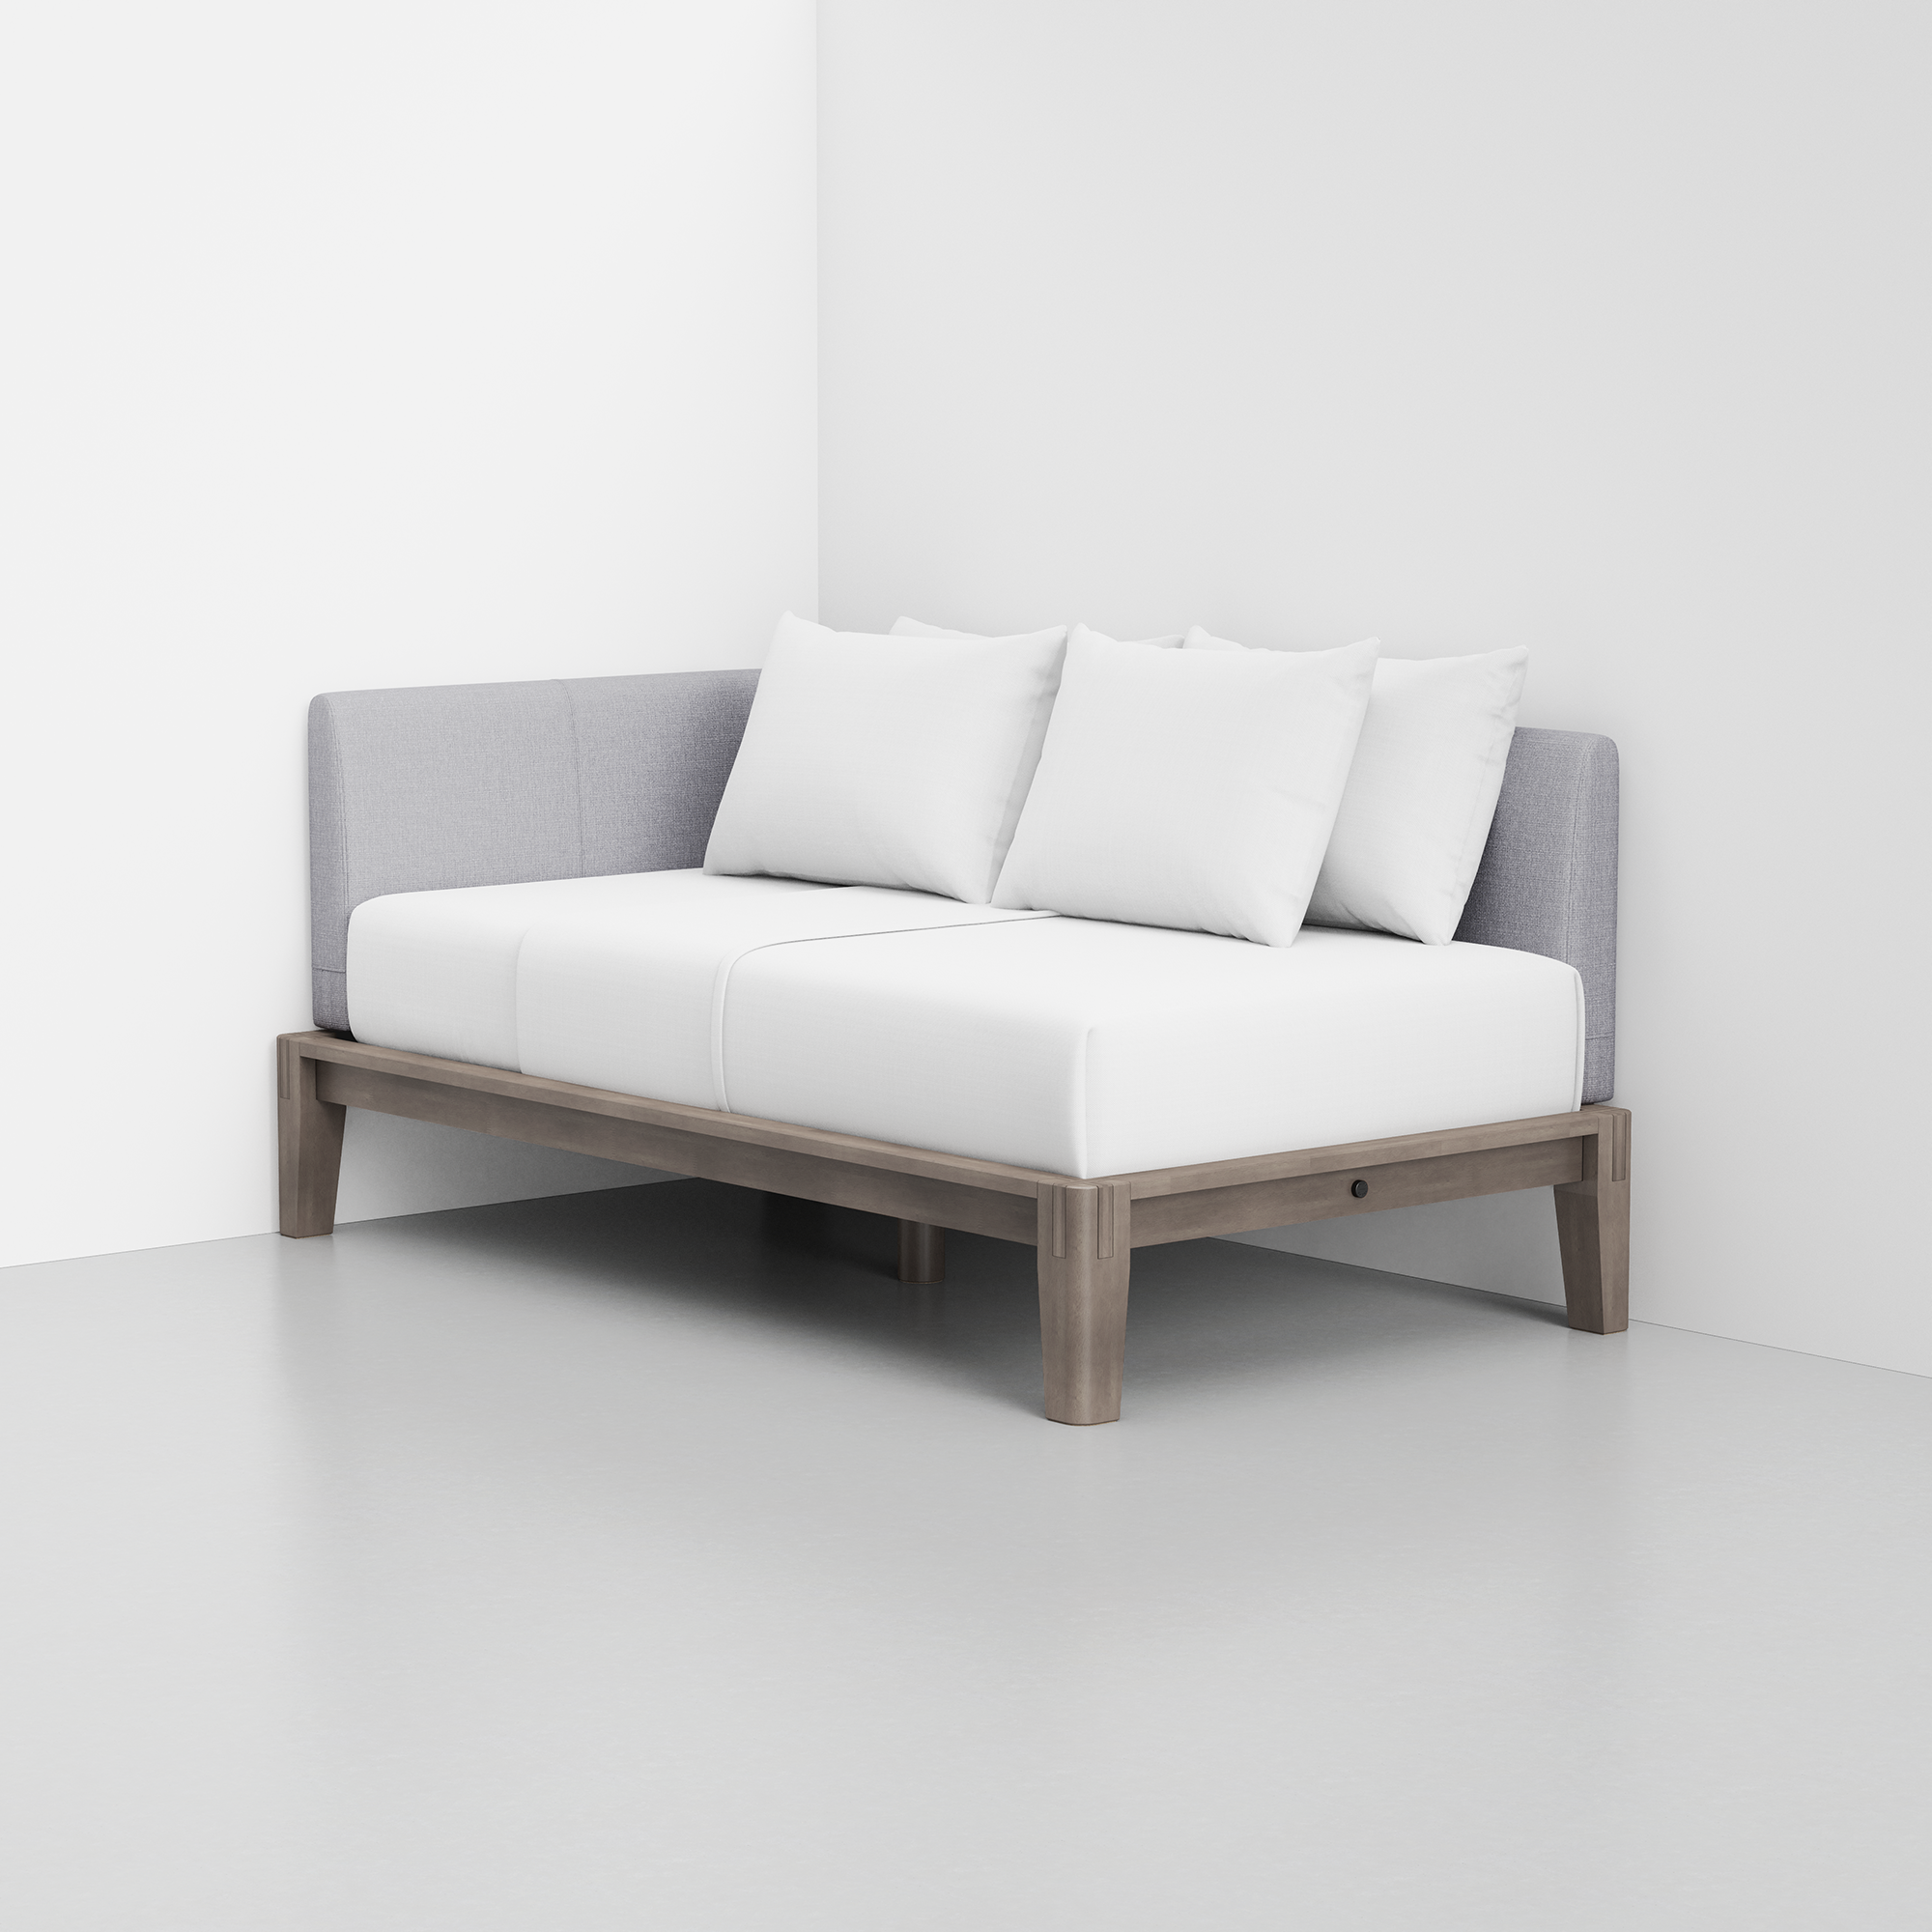 PDP Image: The Daybed (Grey / Fog Grey) - Rendering - Pillows Stacked